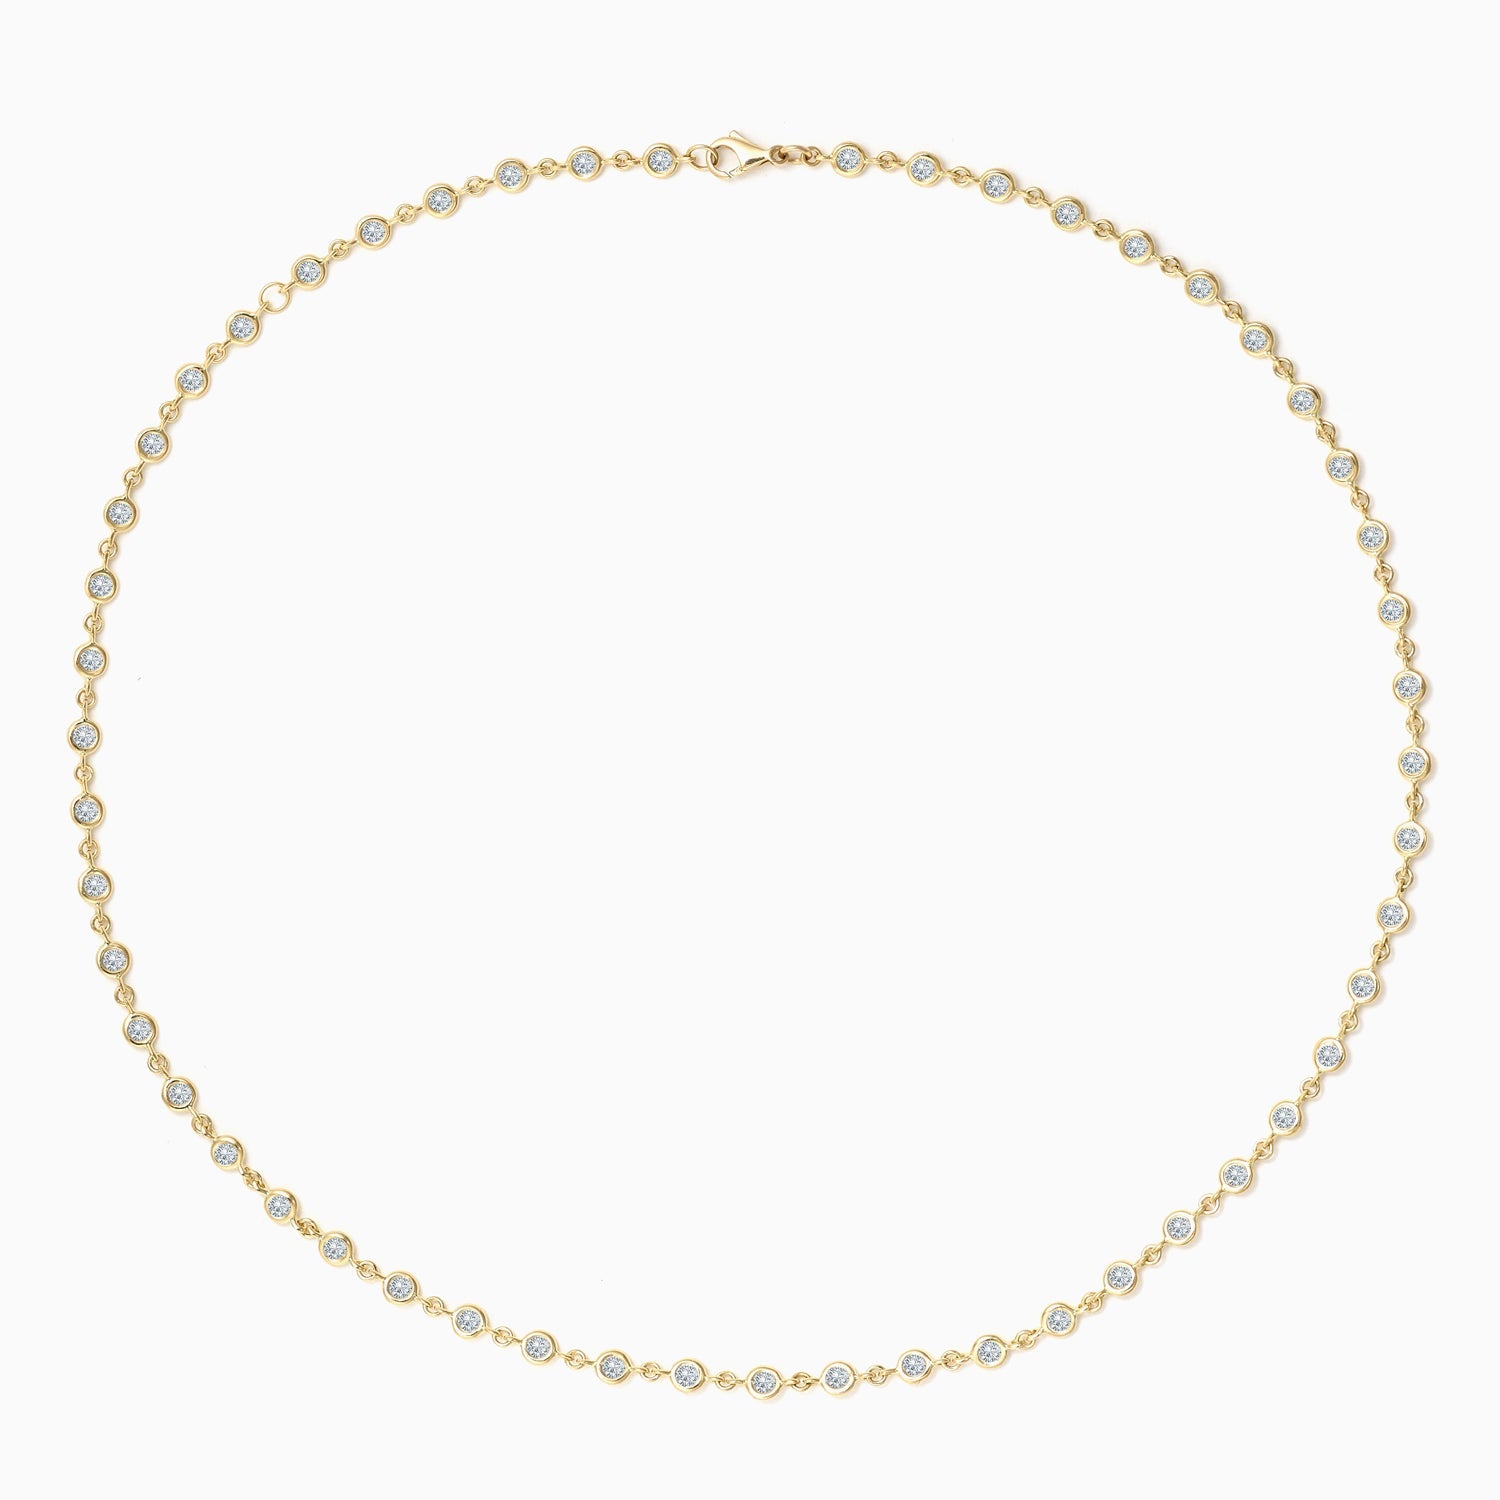 This elegant Essential Bezel Tennis Necklace boasts a timeless design with its bezel set diamonds. Shop now on falenafinejewelry.com or in-store